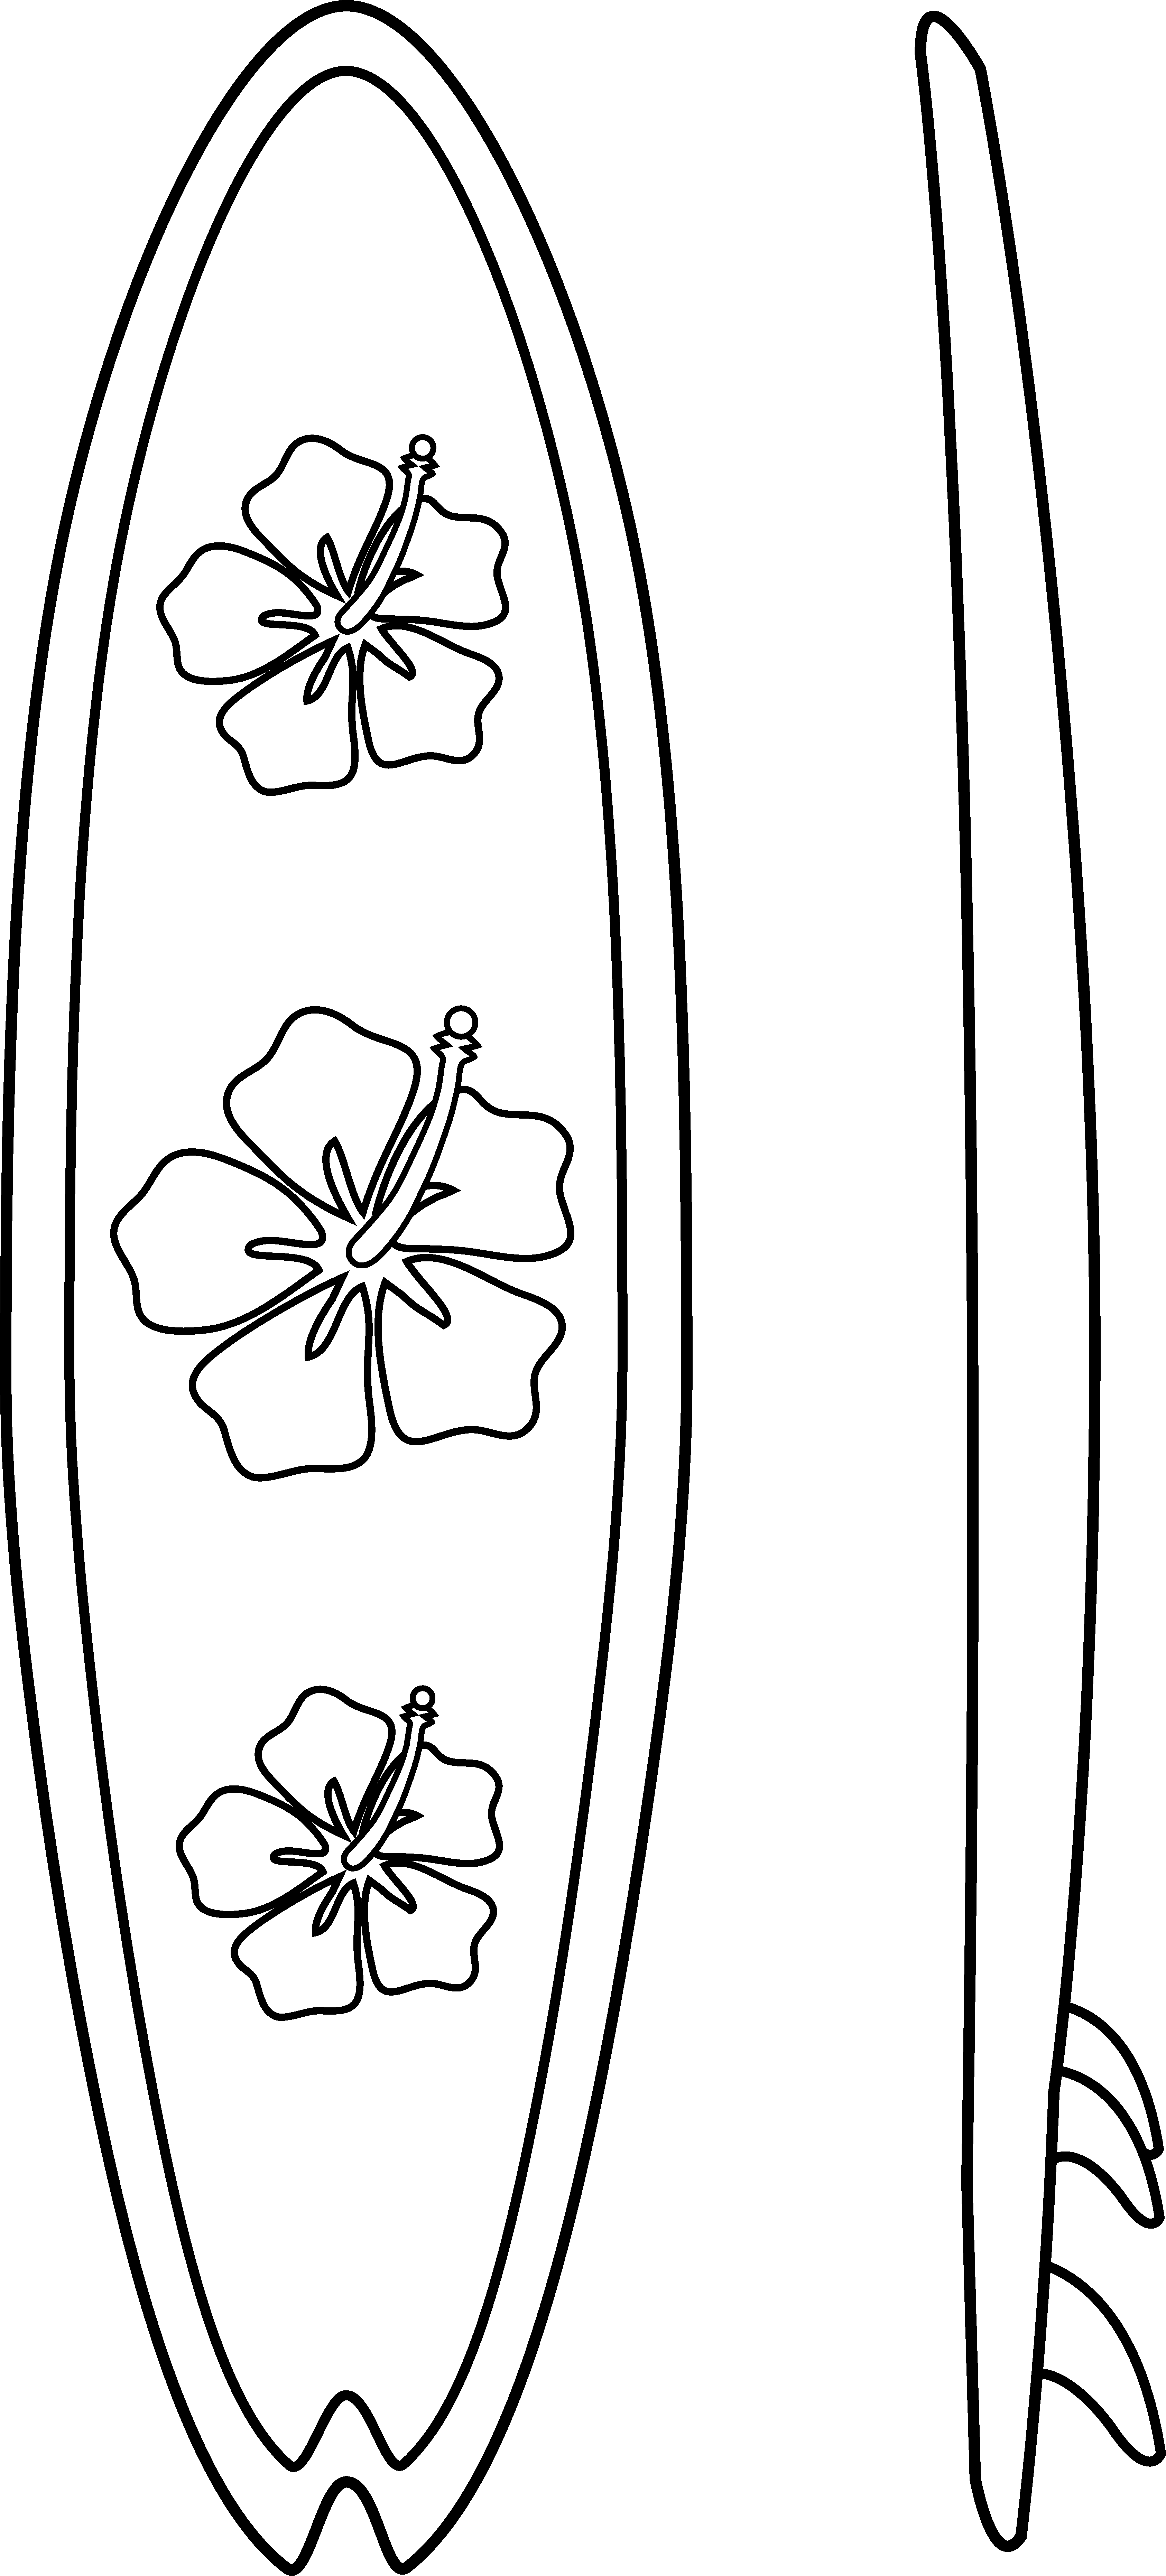 coloring pictures of surfboards surfboards on beach coloring page free printable pictures of coloring surfboards 